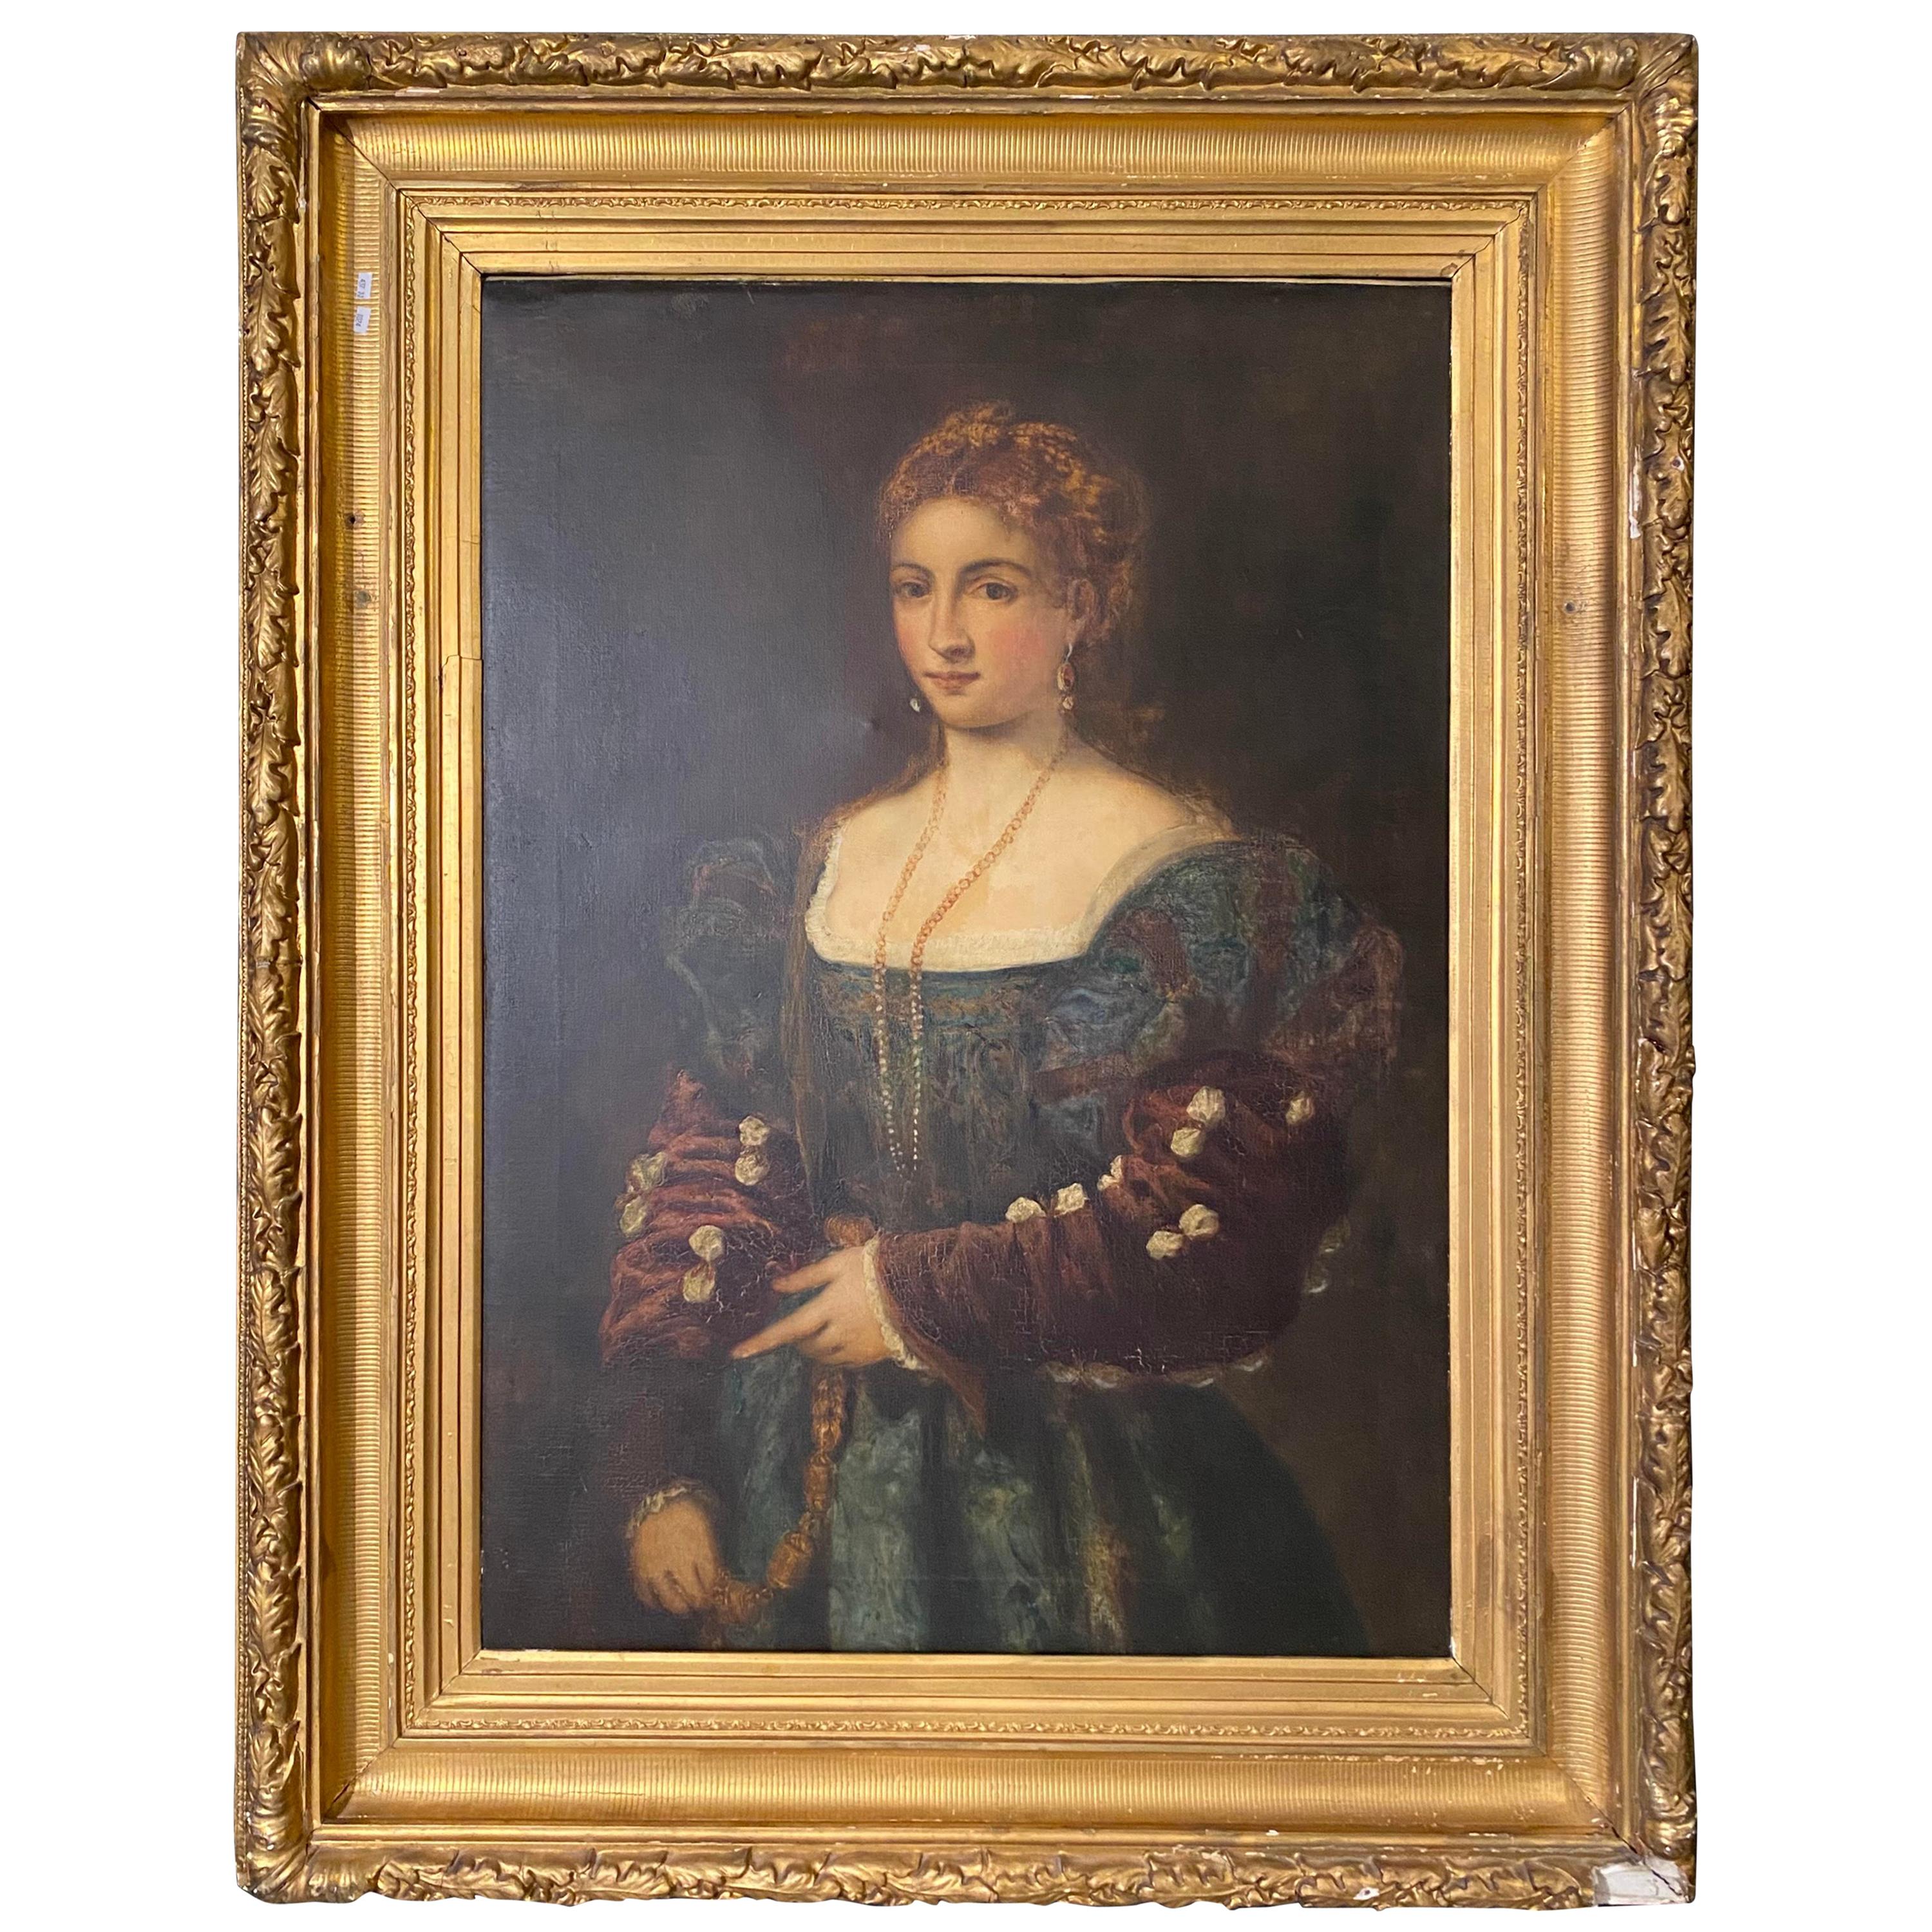 19th Century Large Portrait Painting of a Duchess in Proper Attire